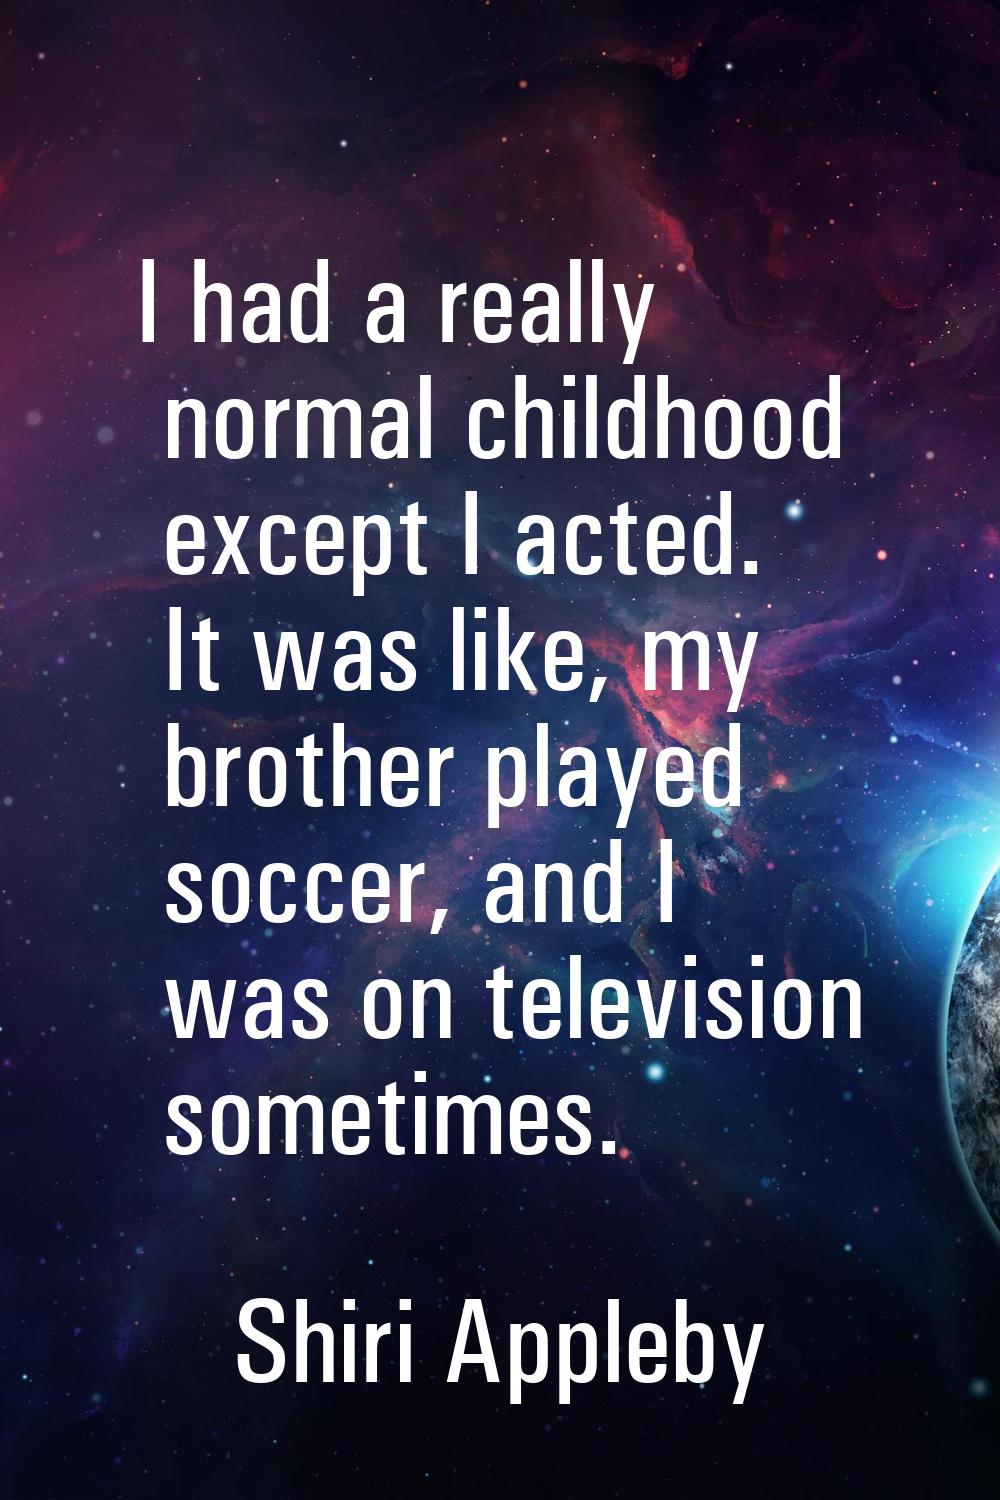 I had a really normal childhood except I acted. It was like, my brother played soccer, and I was on